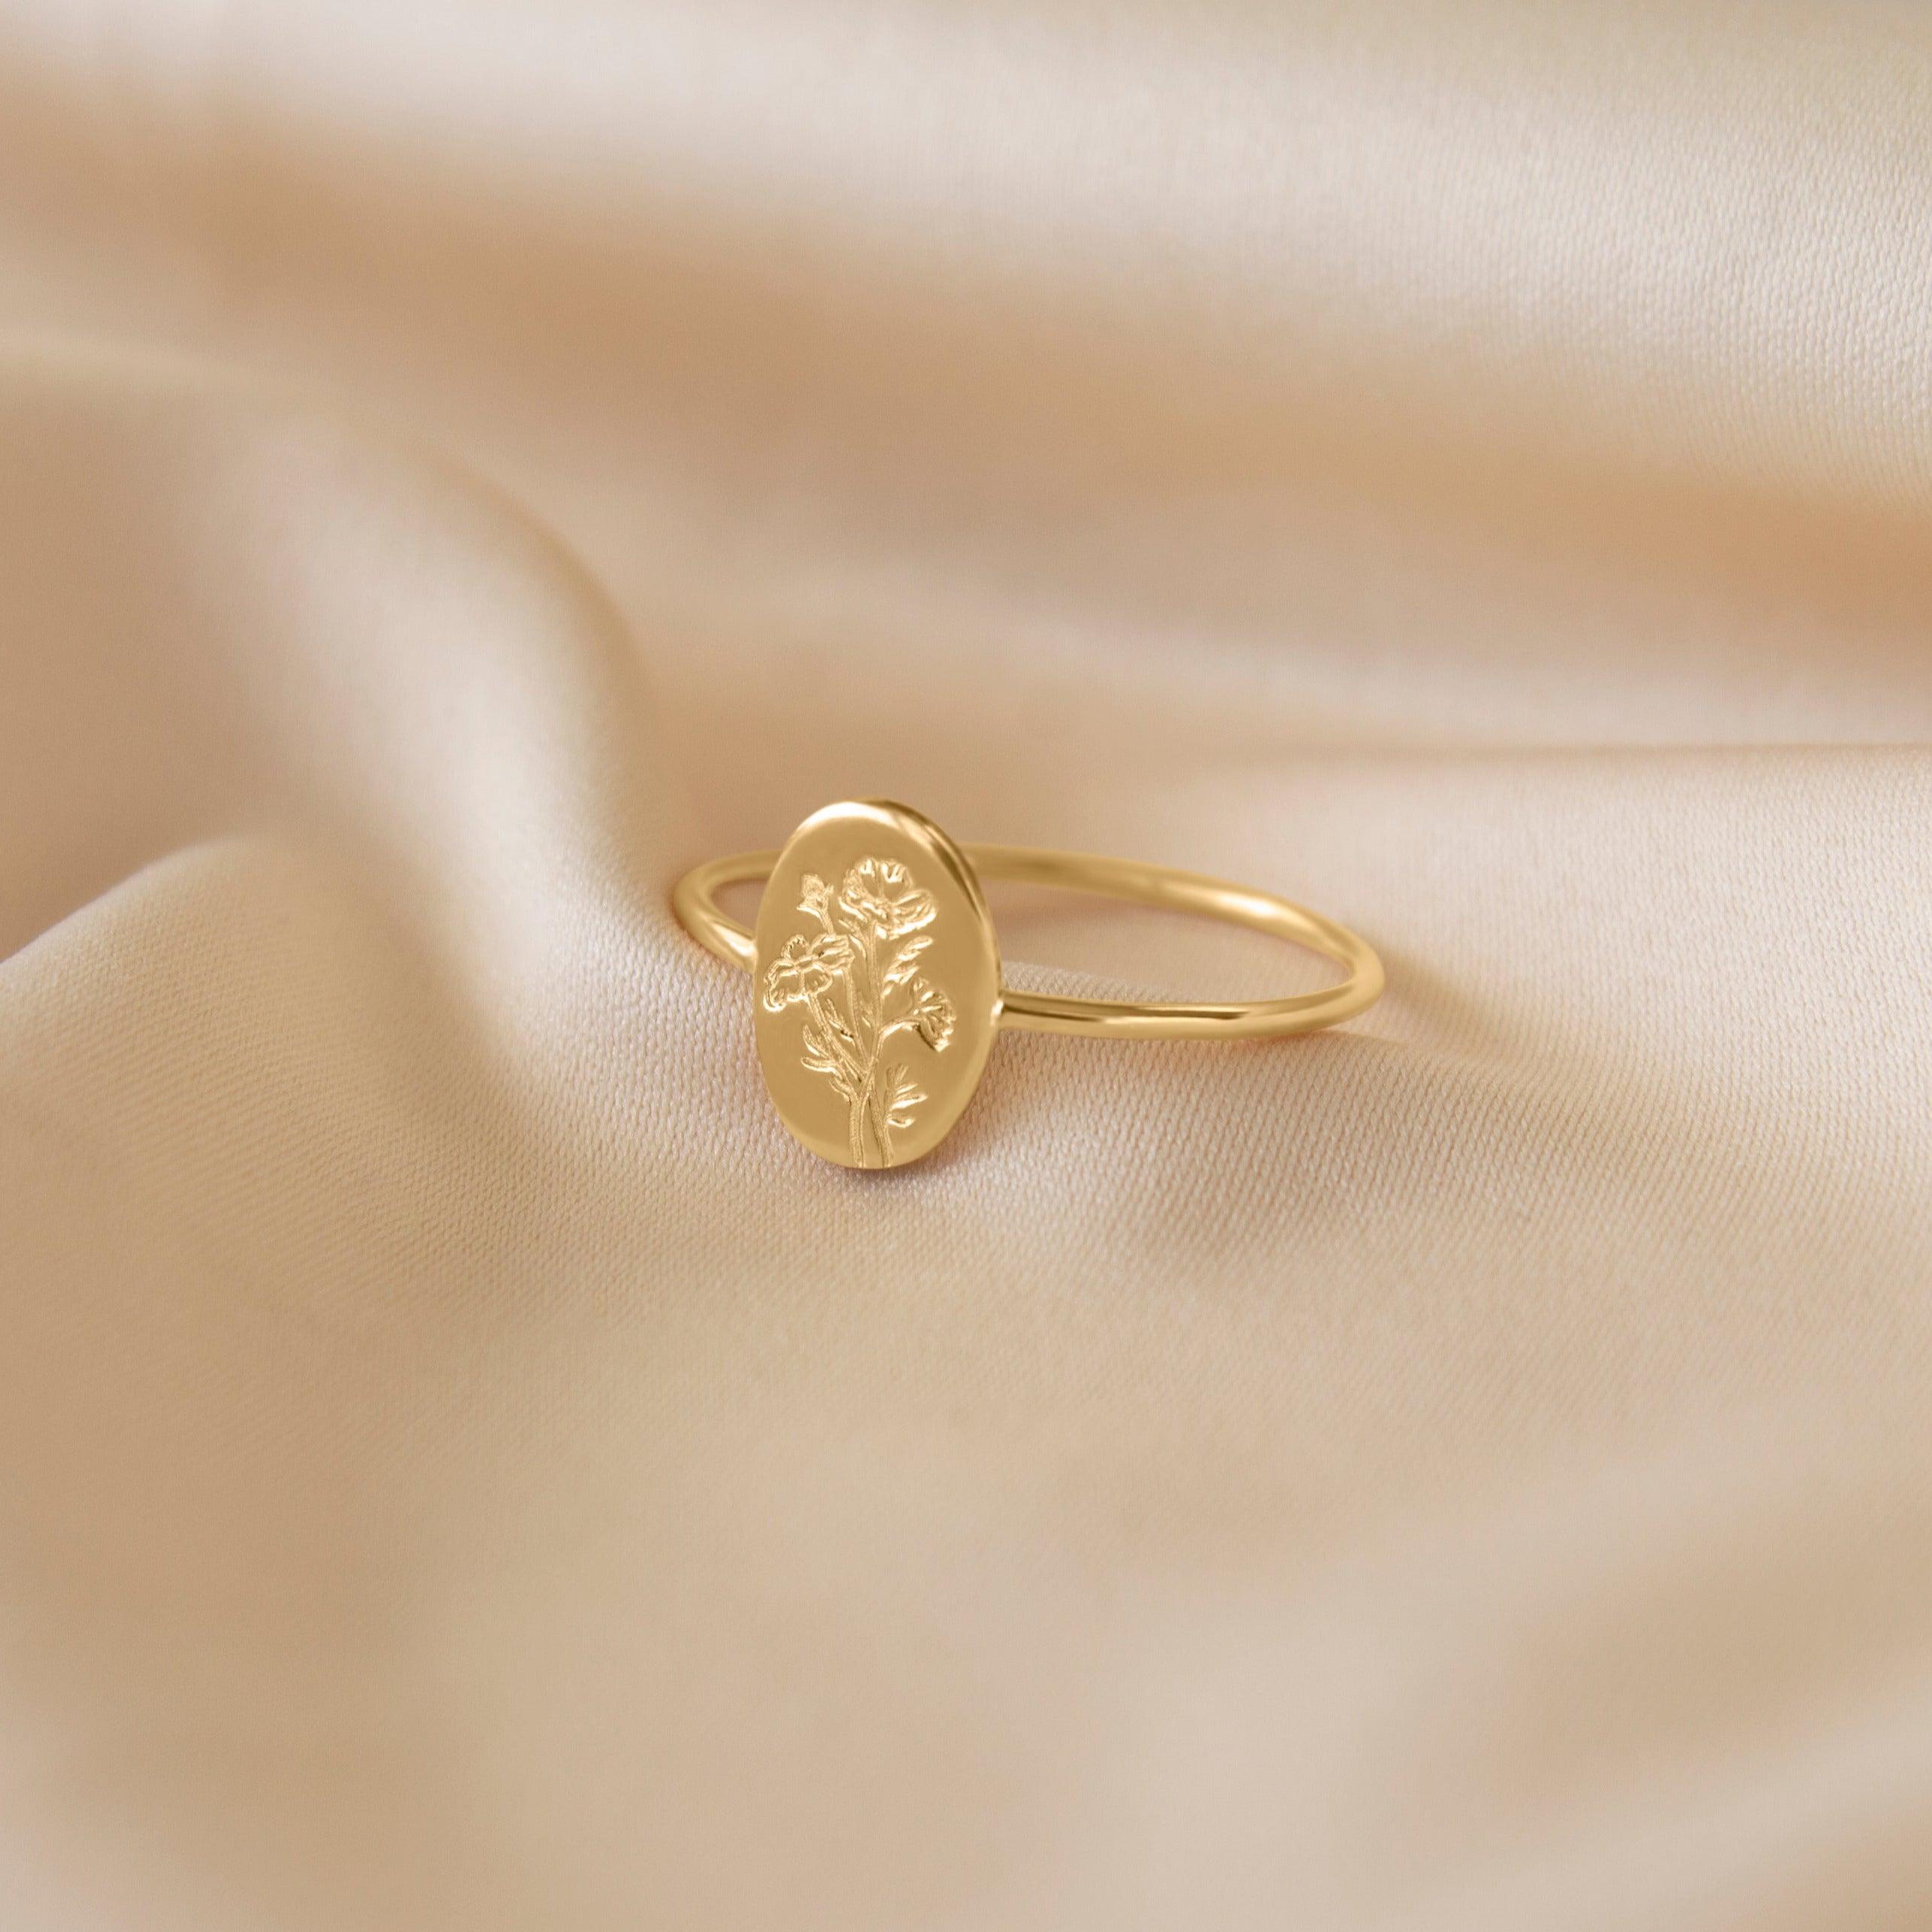 Fleur Birth Flower Ring - Nolia Jewelry - Meaningful + Sustainably Handcrafted Jewelry